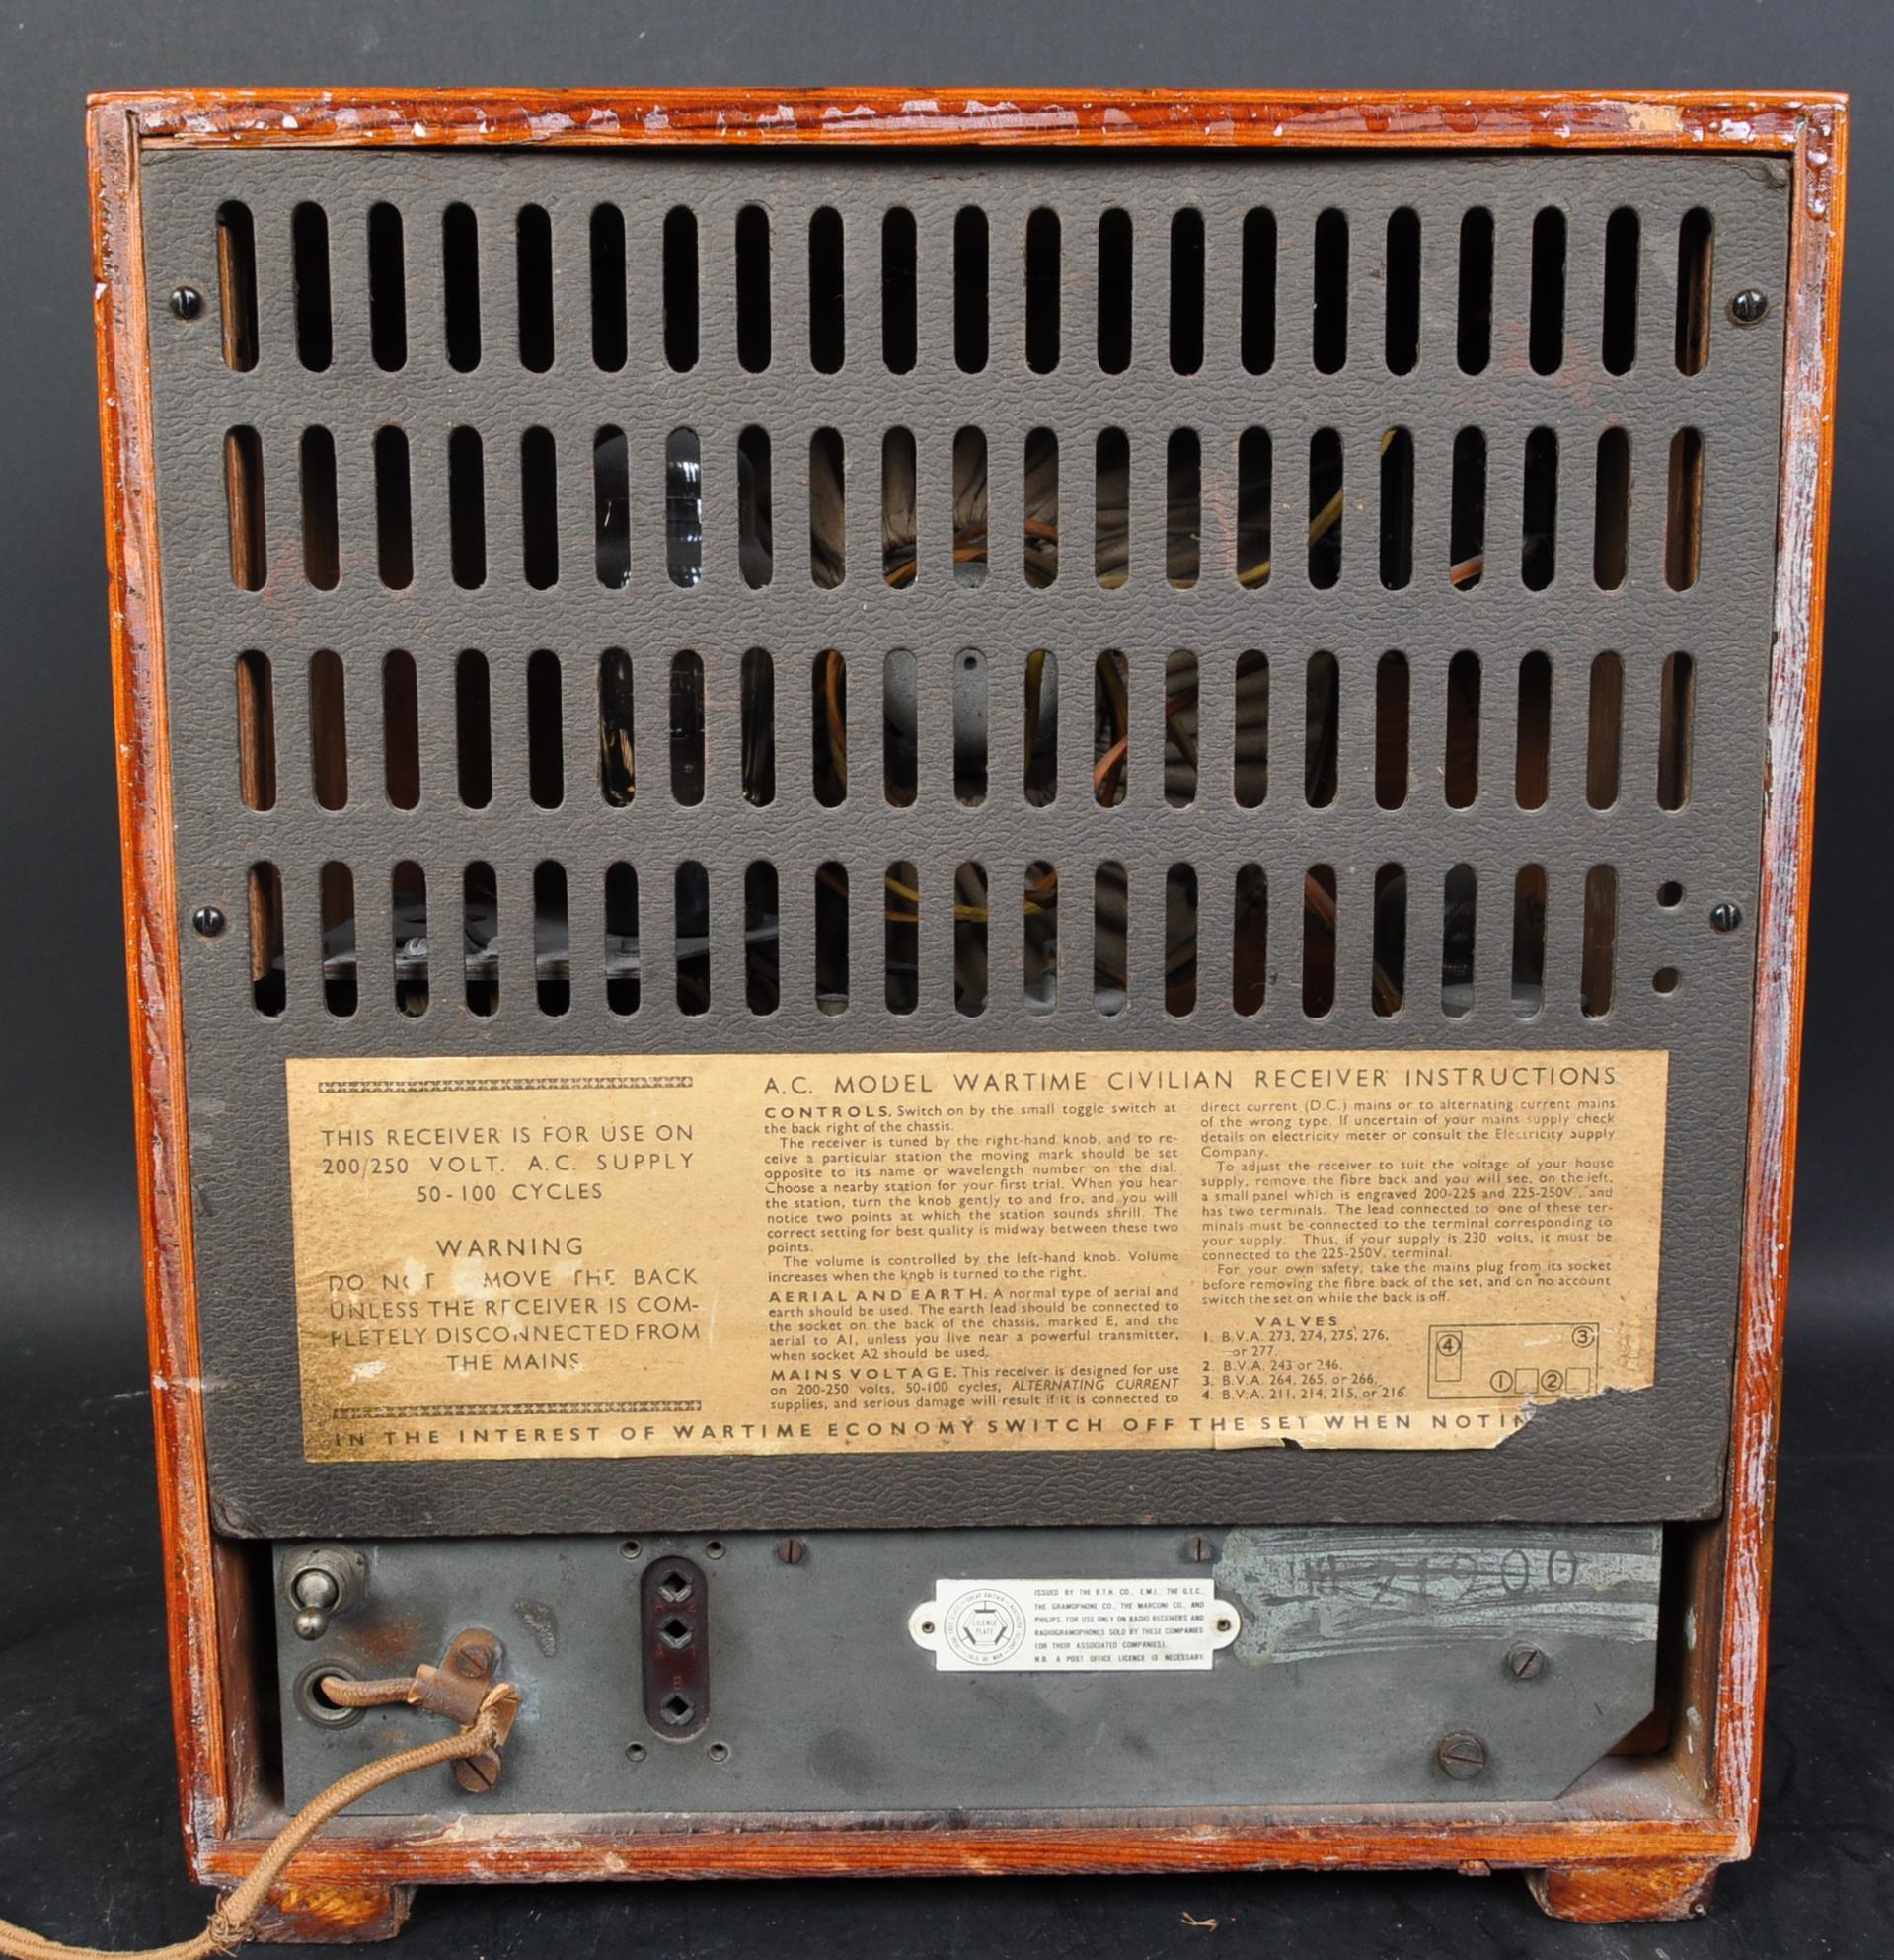 VINTAGE 1940S WWII WARTIME CIVILIAN RECEIVER - Image 4 of 5